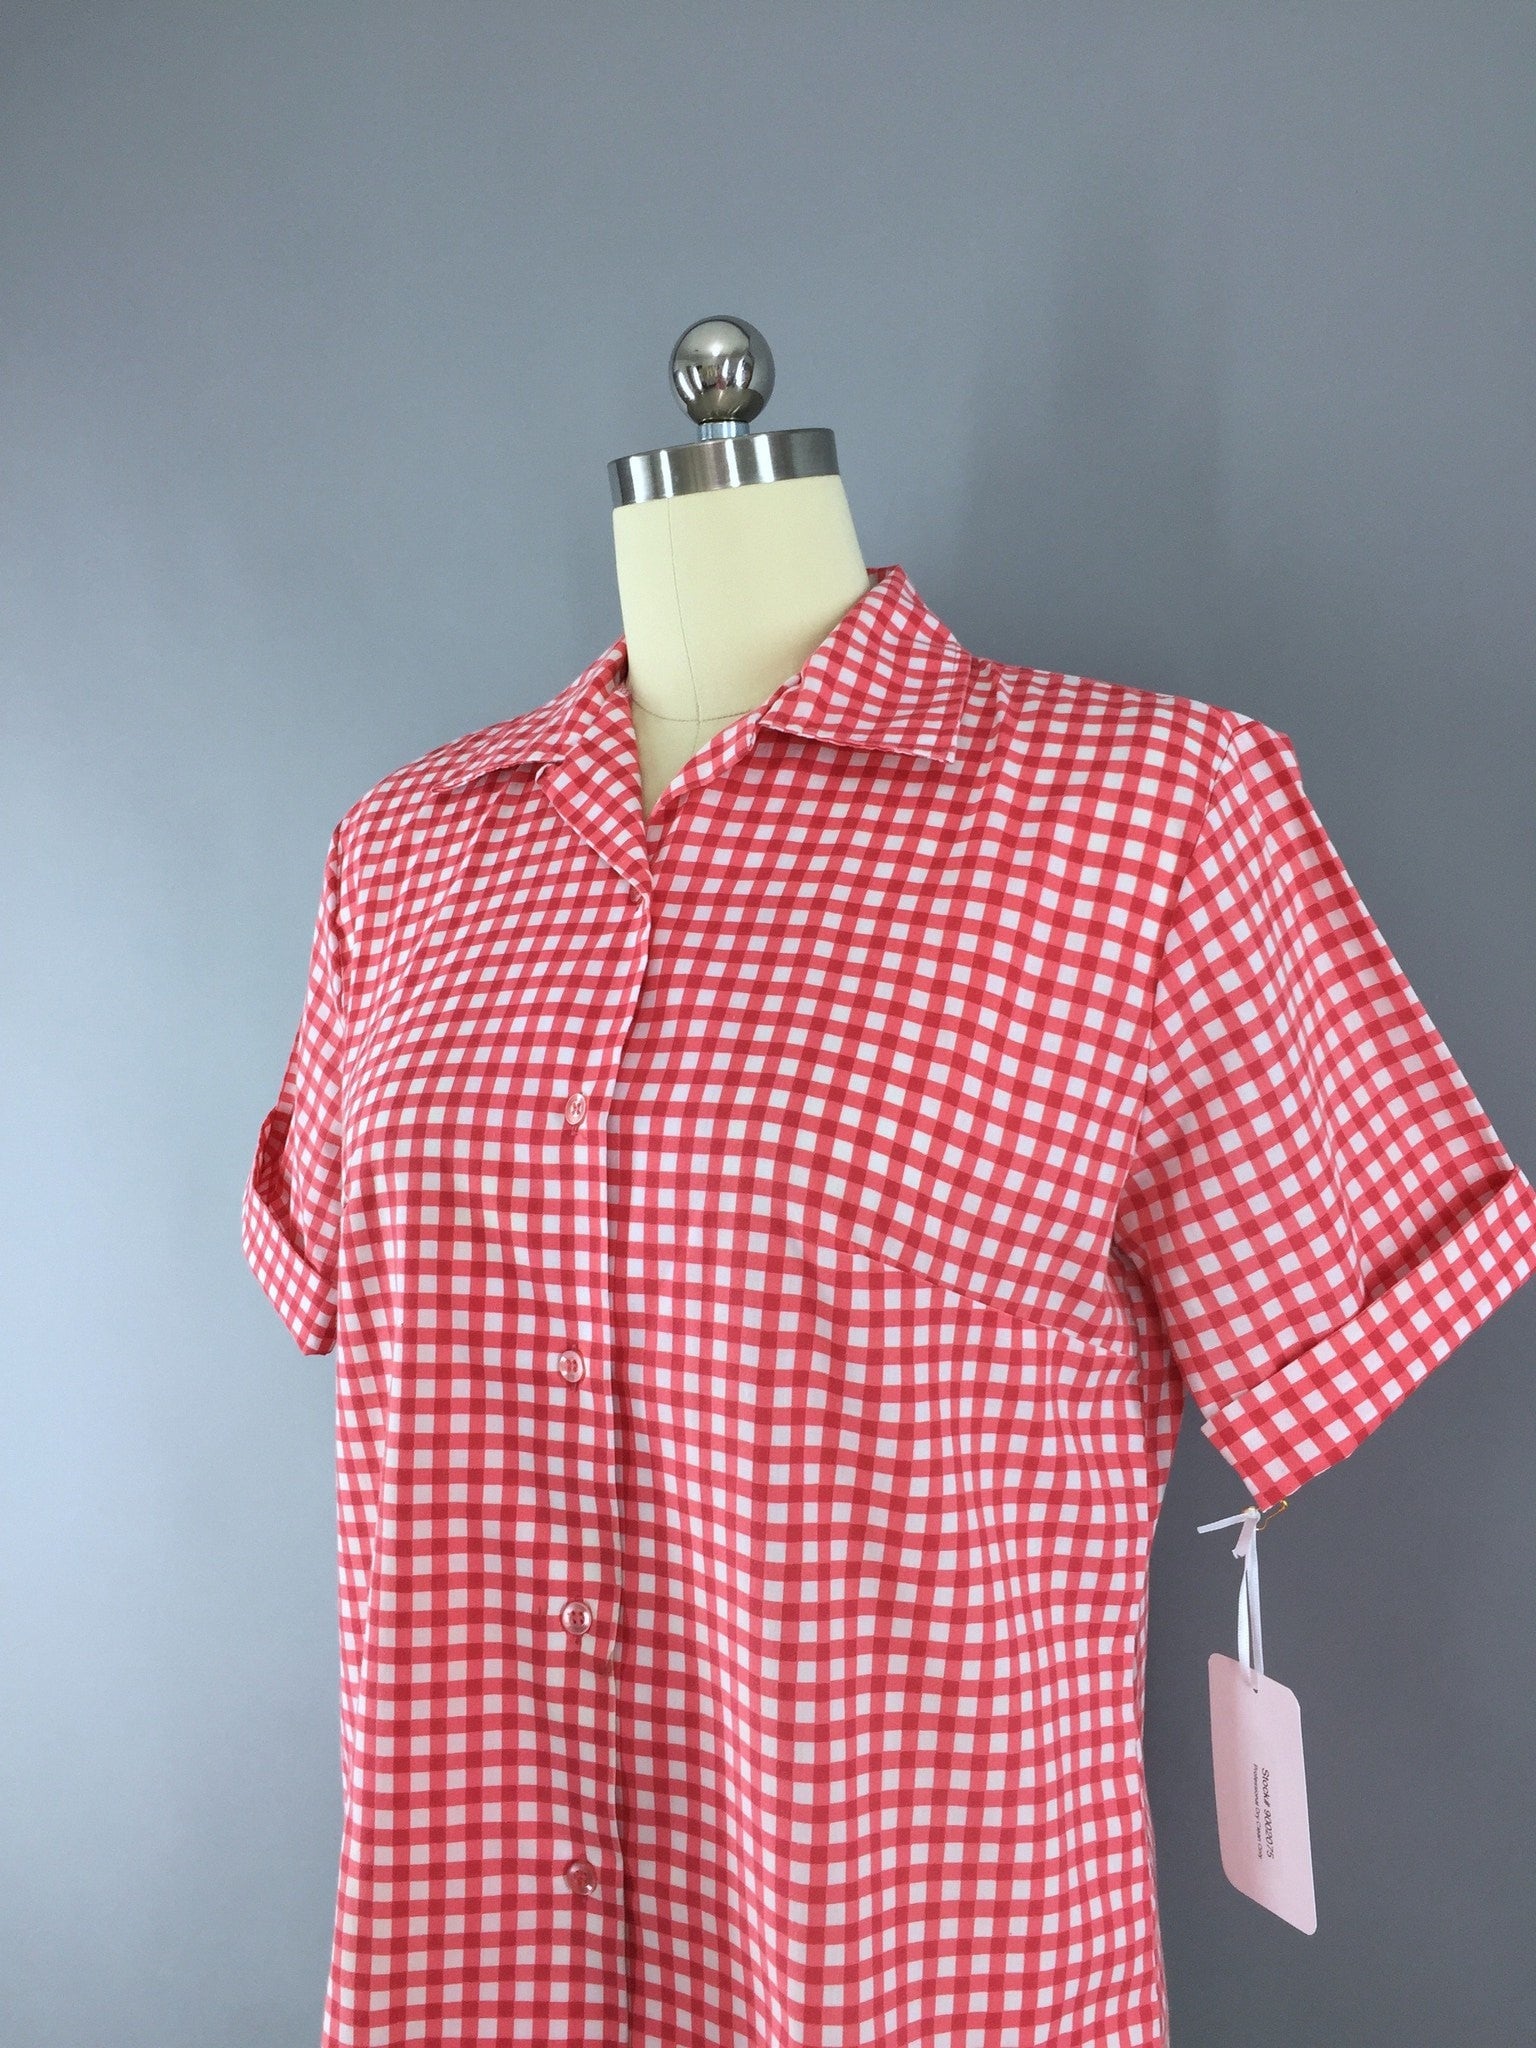 Vintage 1960s Gingham Rockabilly Shirt by Merriweather